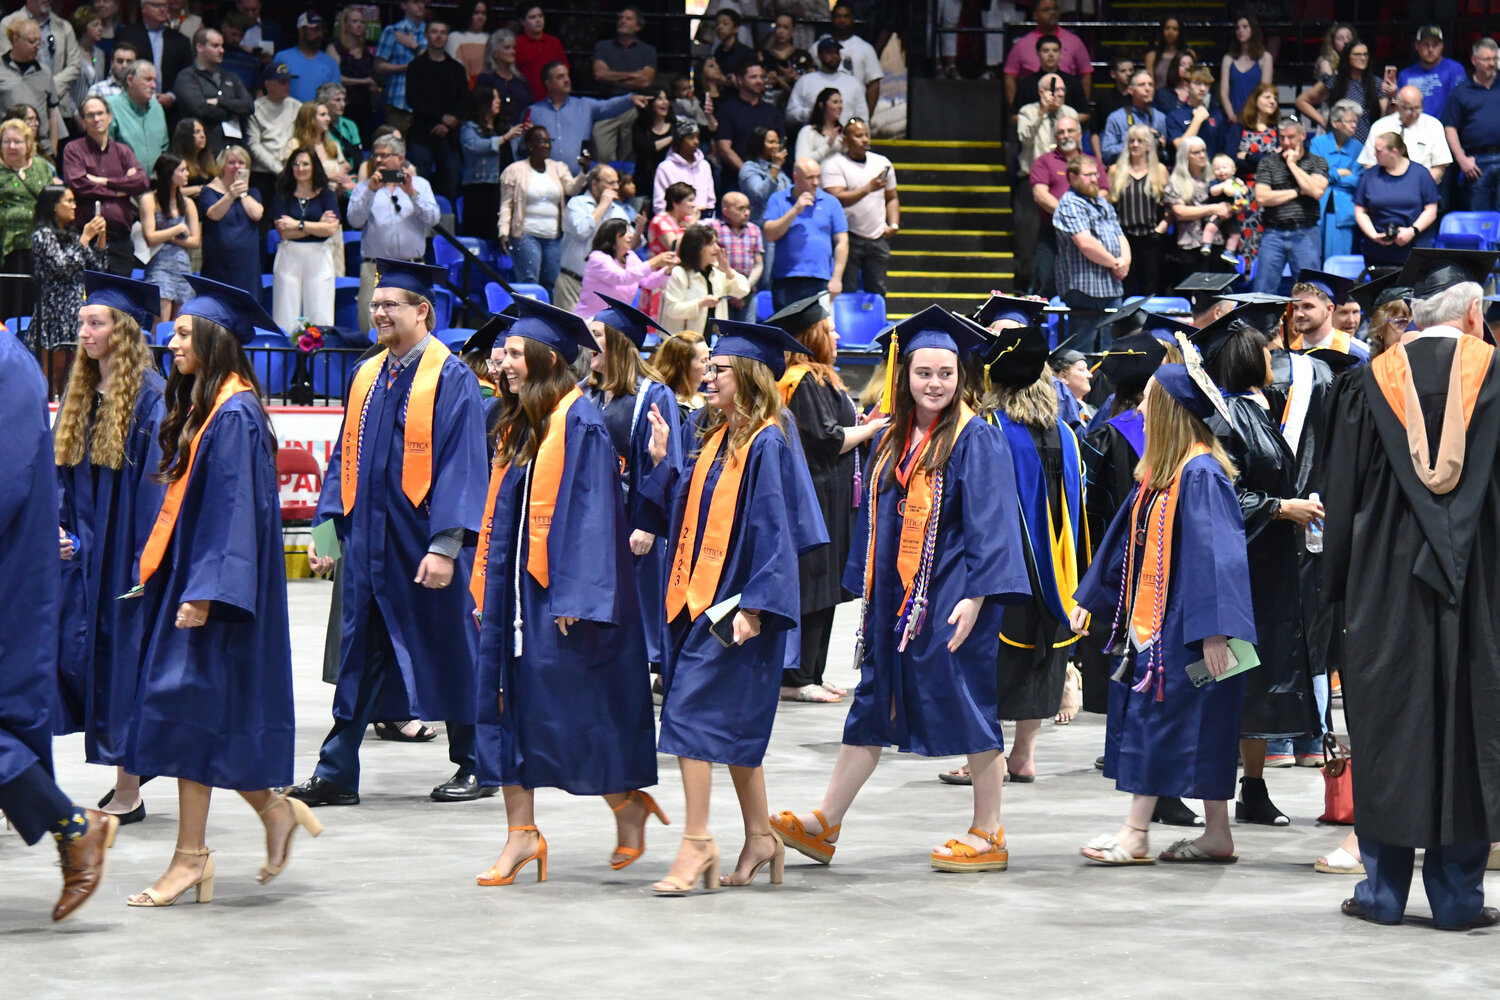 Students look around to see the crowd of people in attendance as they walk to their seats during Utica University's 74th undergraduate commencement.